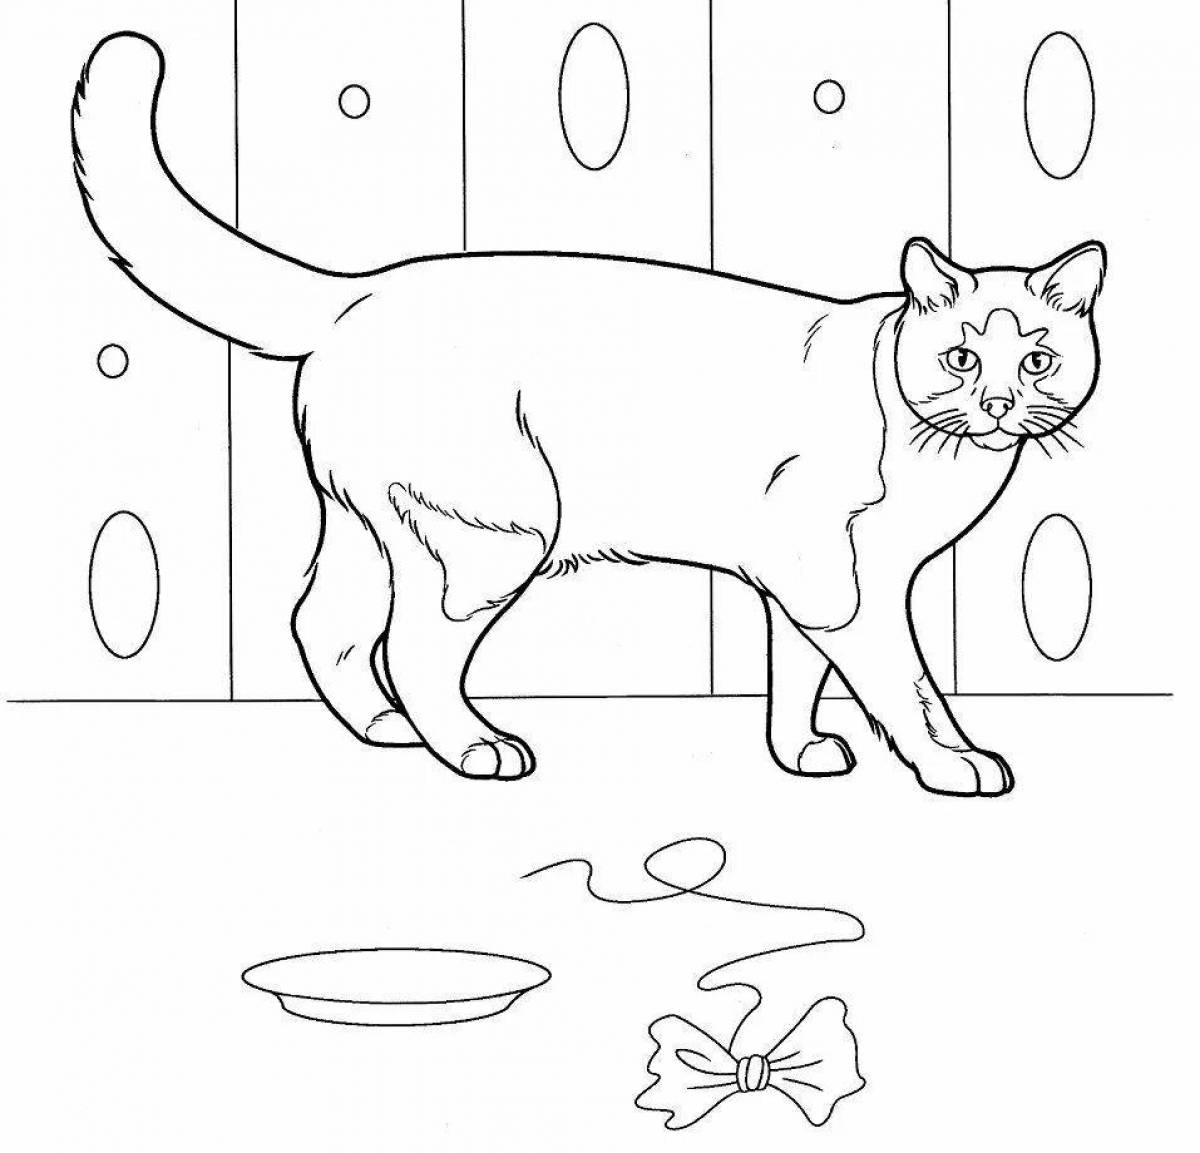 Coloring book determined sitting cat